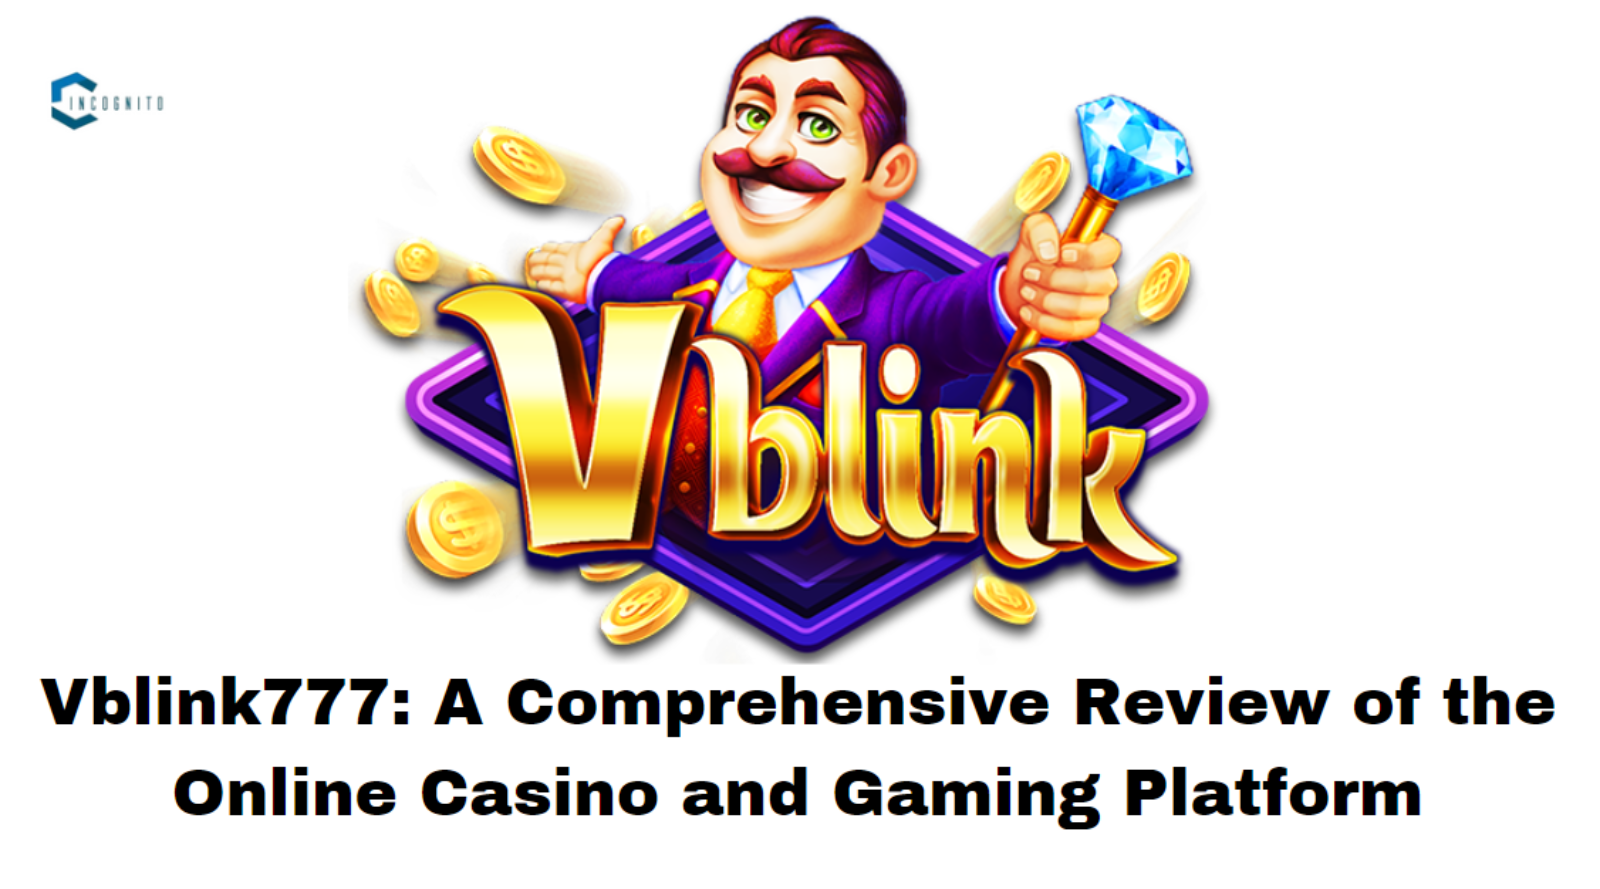 Vblink777: A Comprehensive Review of the Online Casino and Gaming Platform